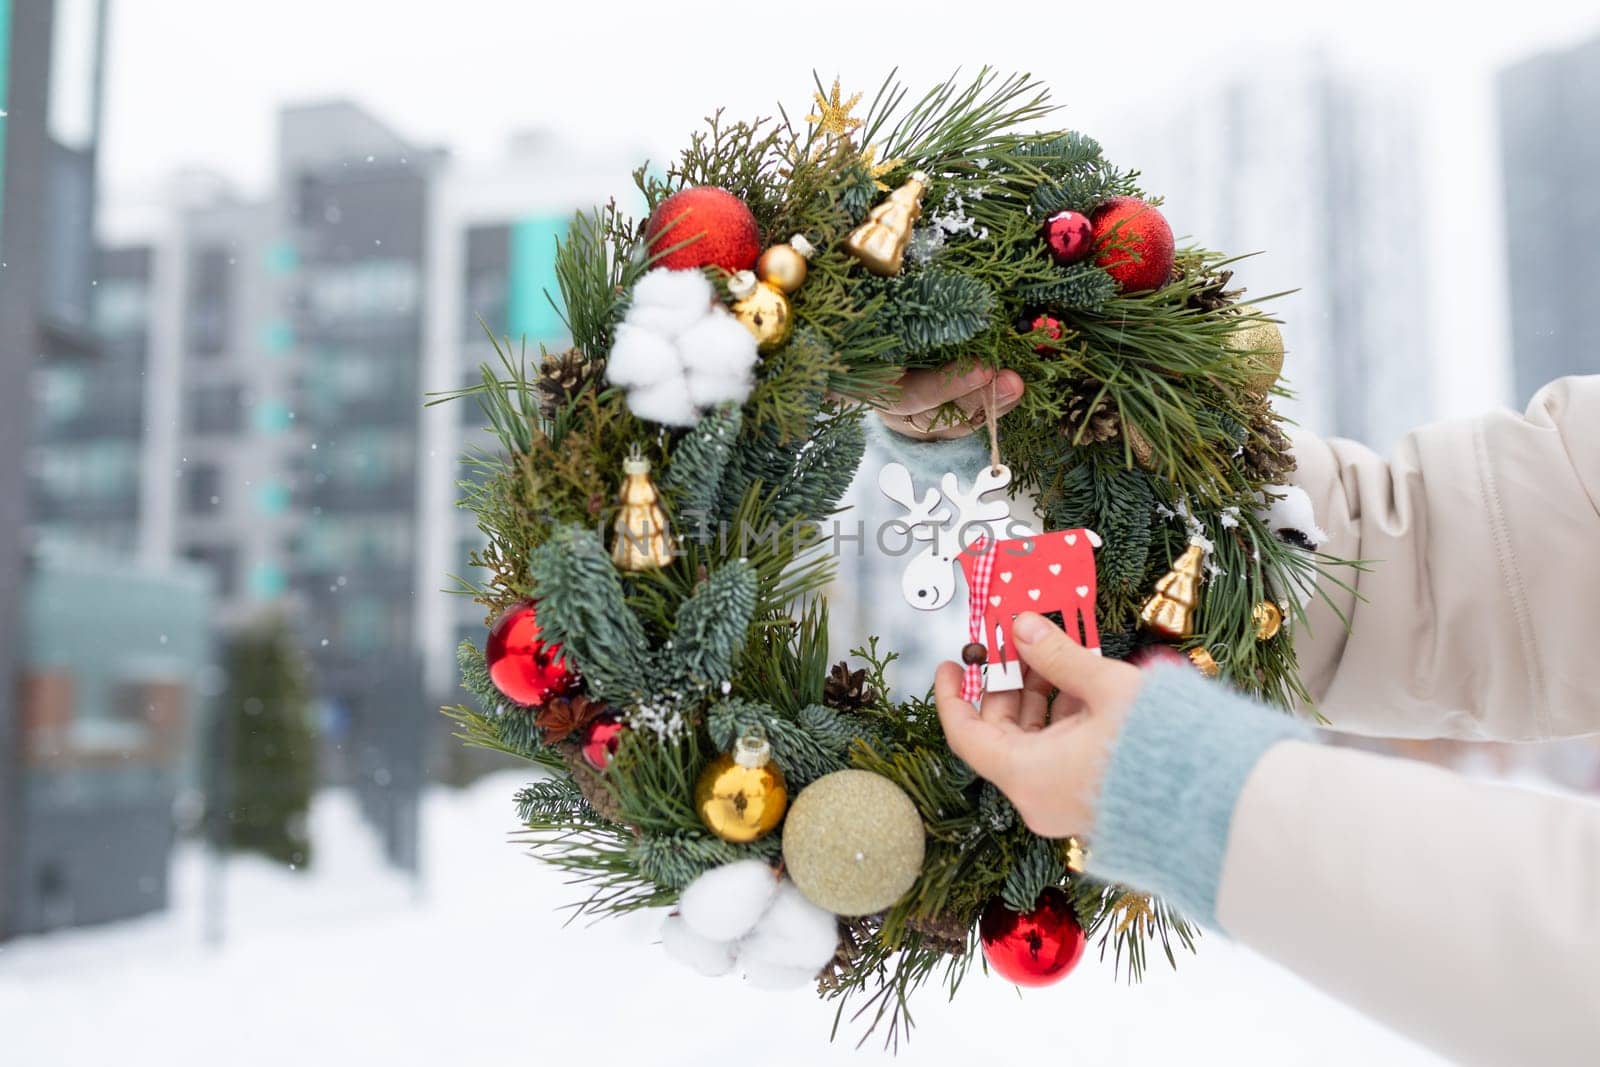 Person Holding Christmas Wreath With Decorations by TRMK